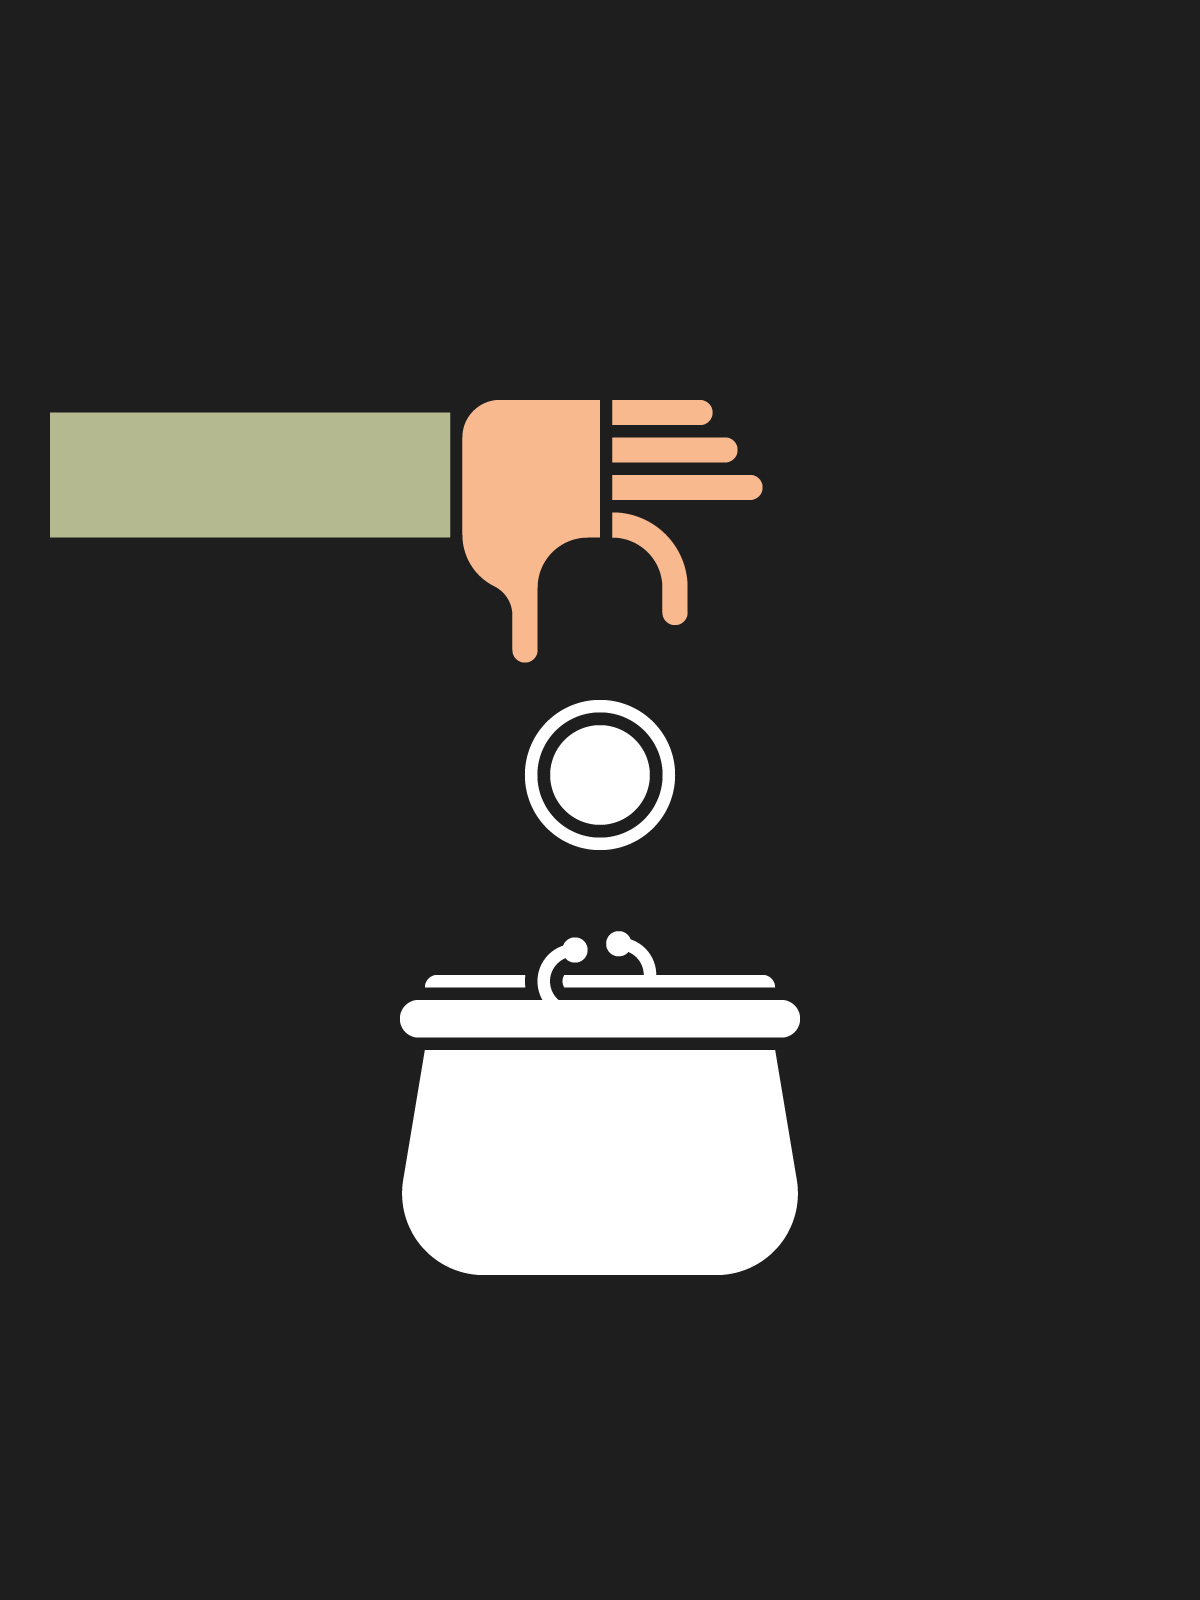 Illustration depicting a stylised hand as it drops a coin into a purse.